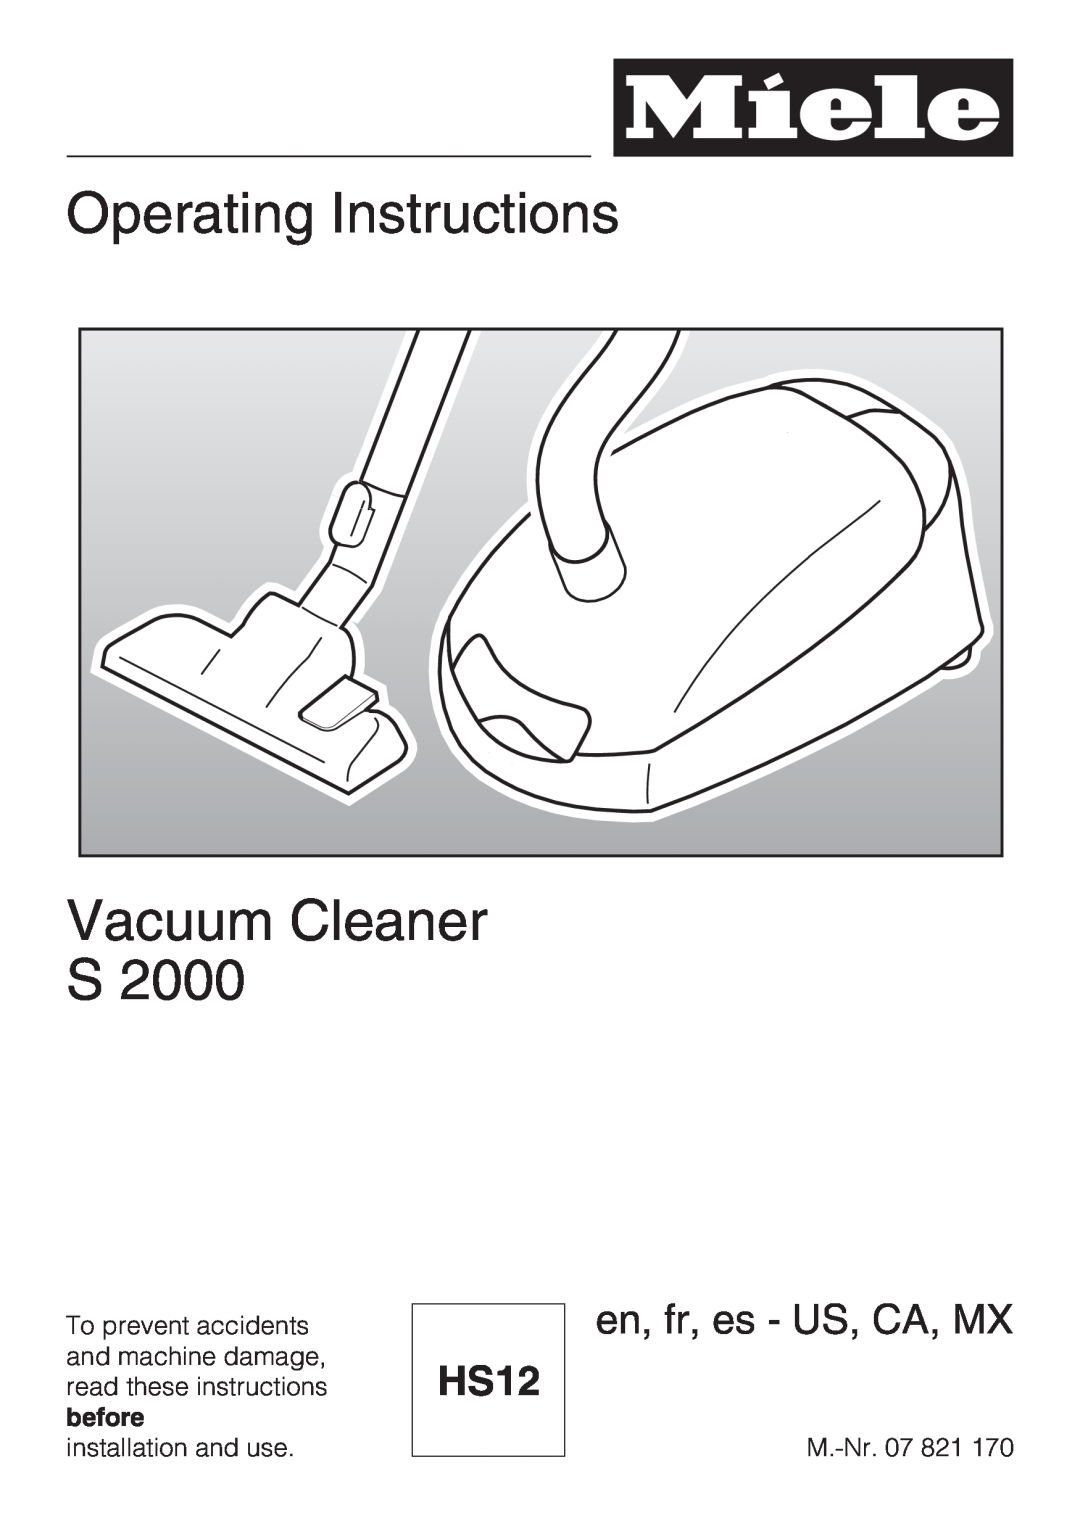 Miele S 2000 operating instructions Operating Instructions Vacuum Cleaner S, HS12, en, fr, es - US, CA, MX 